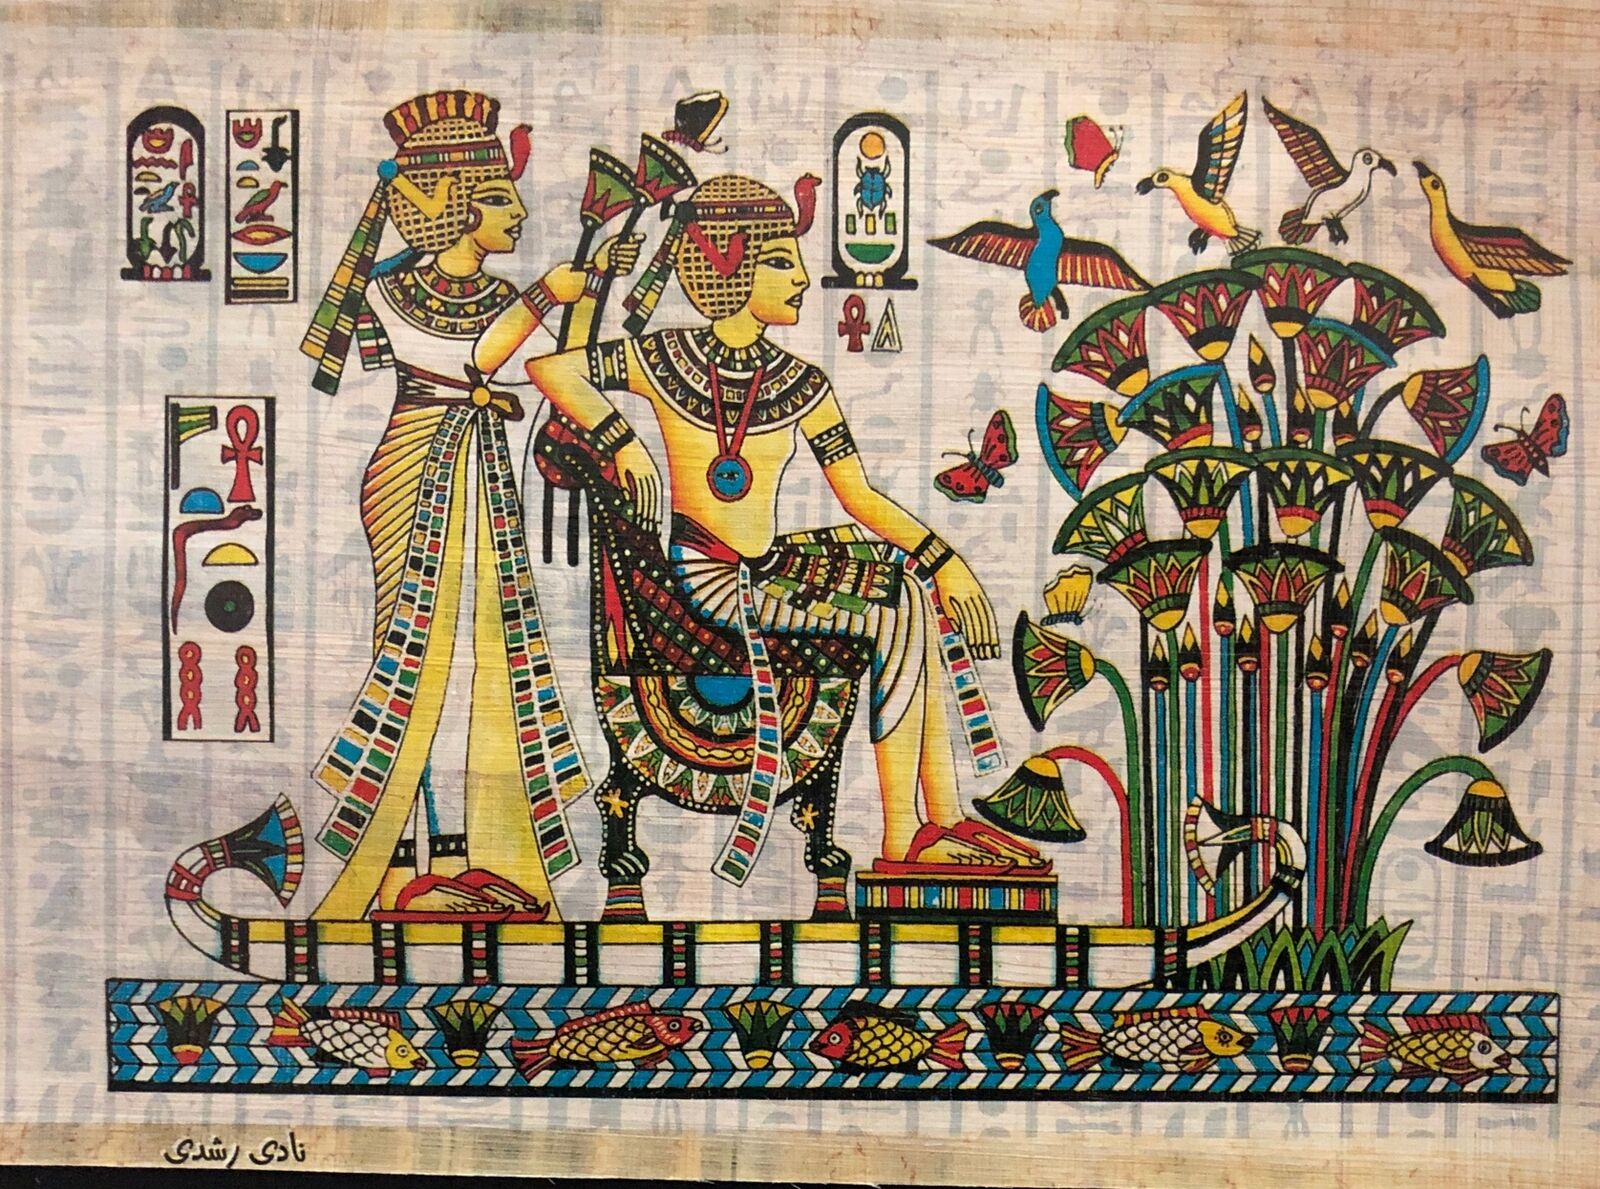 Rare Handmade Egyptian Papyrus - King Tut &his wife in the boat-8x12”